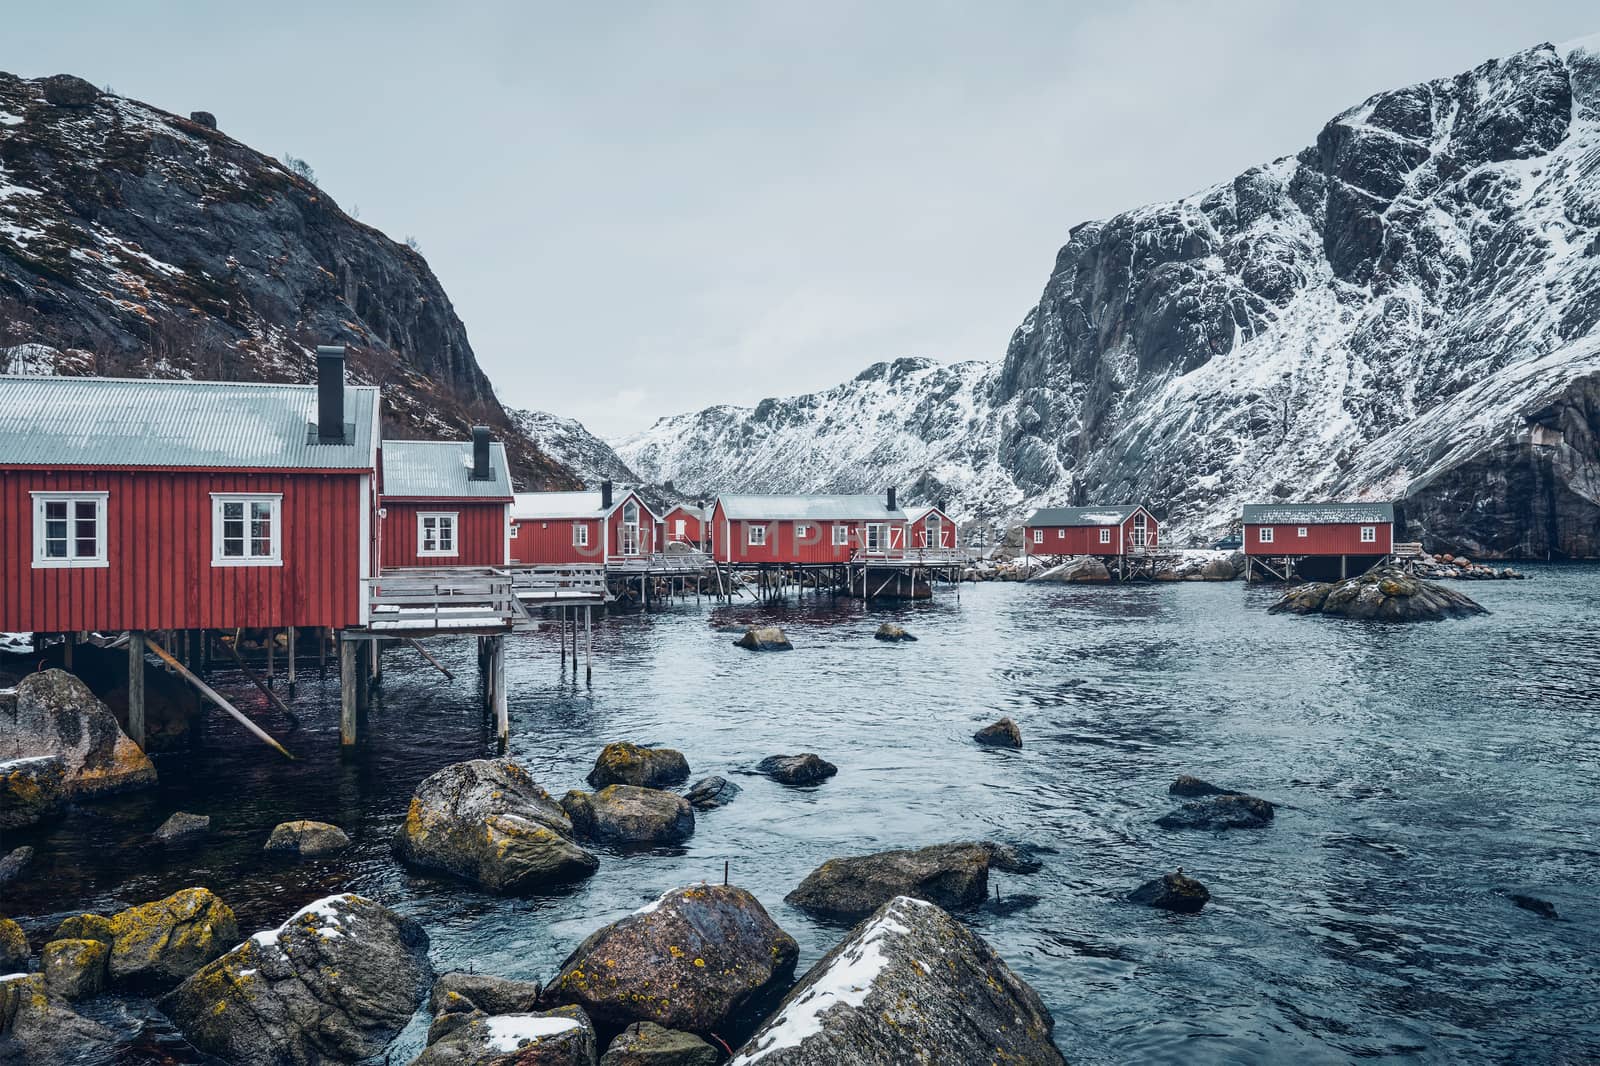 Nusfjord authentic traditional fishing village with traditional red rorbu houses in winter in Norwegian fjord. Lofoten islands, Norway